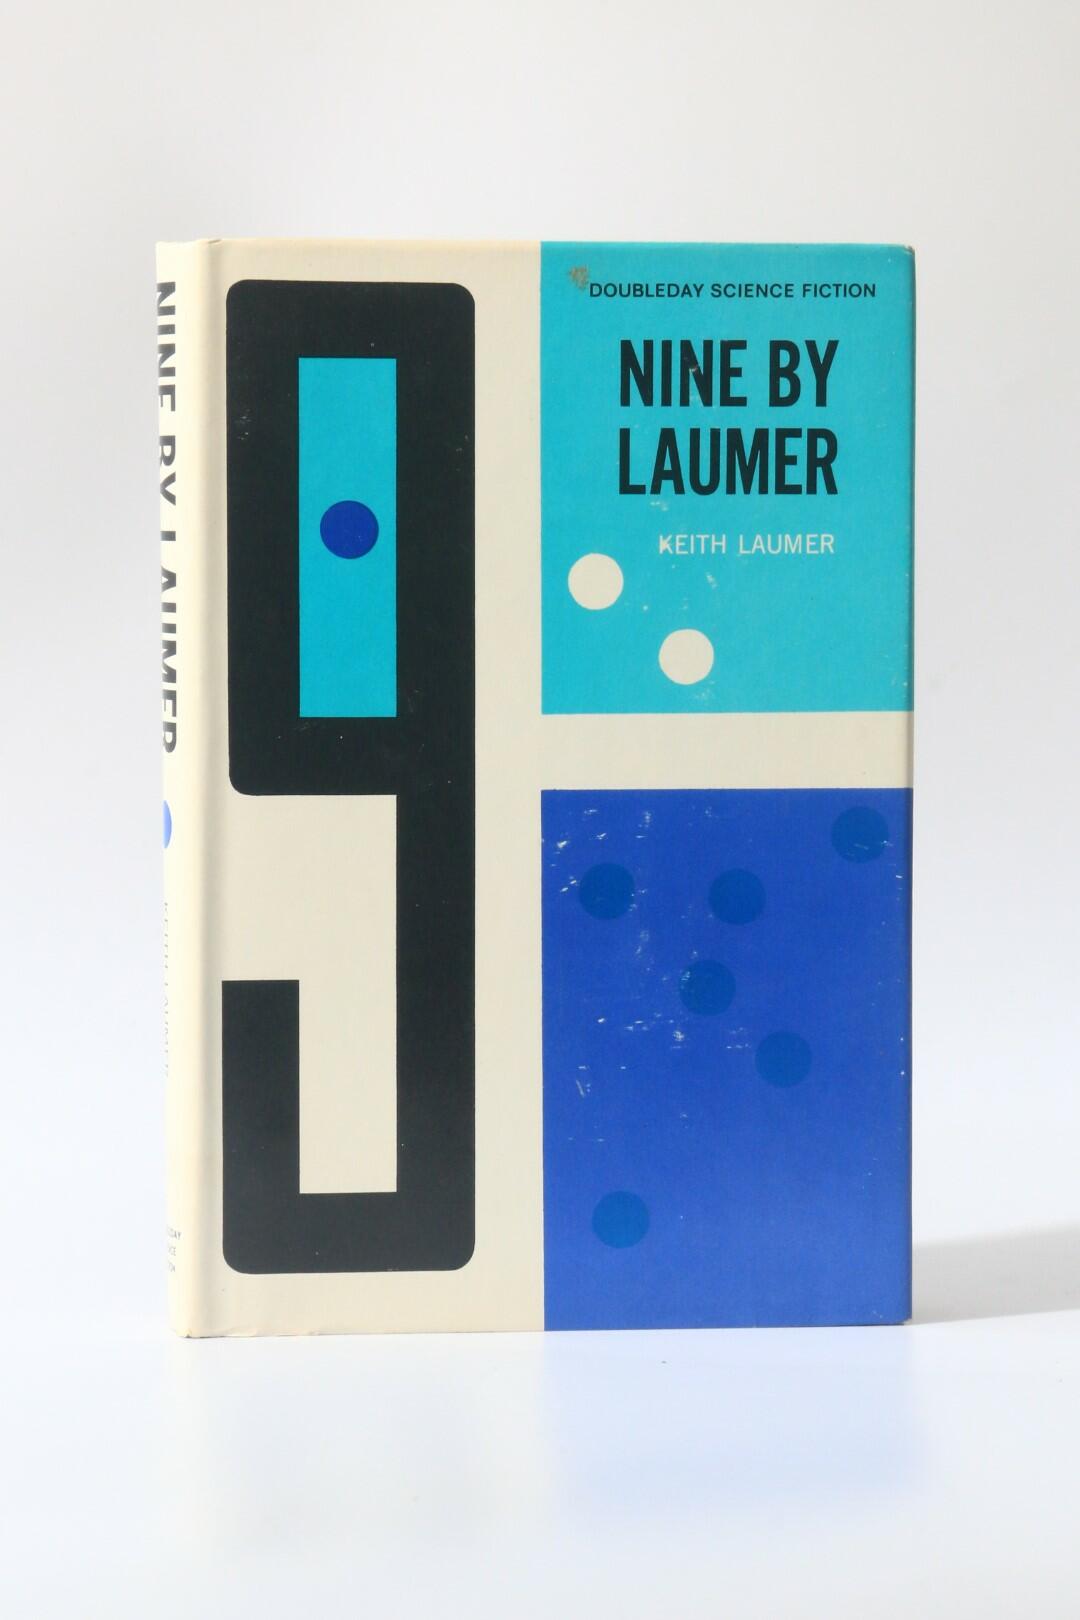 Keith Laumer - Nine by Laumer - Doubleday, 1967, First Edition.